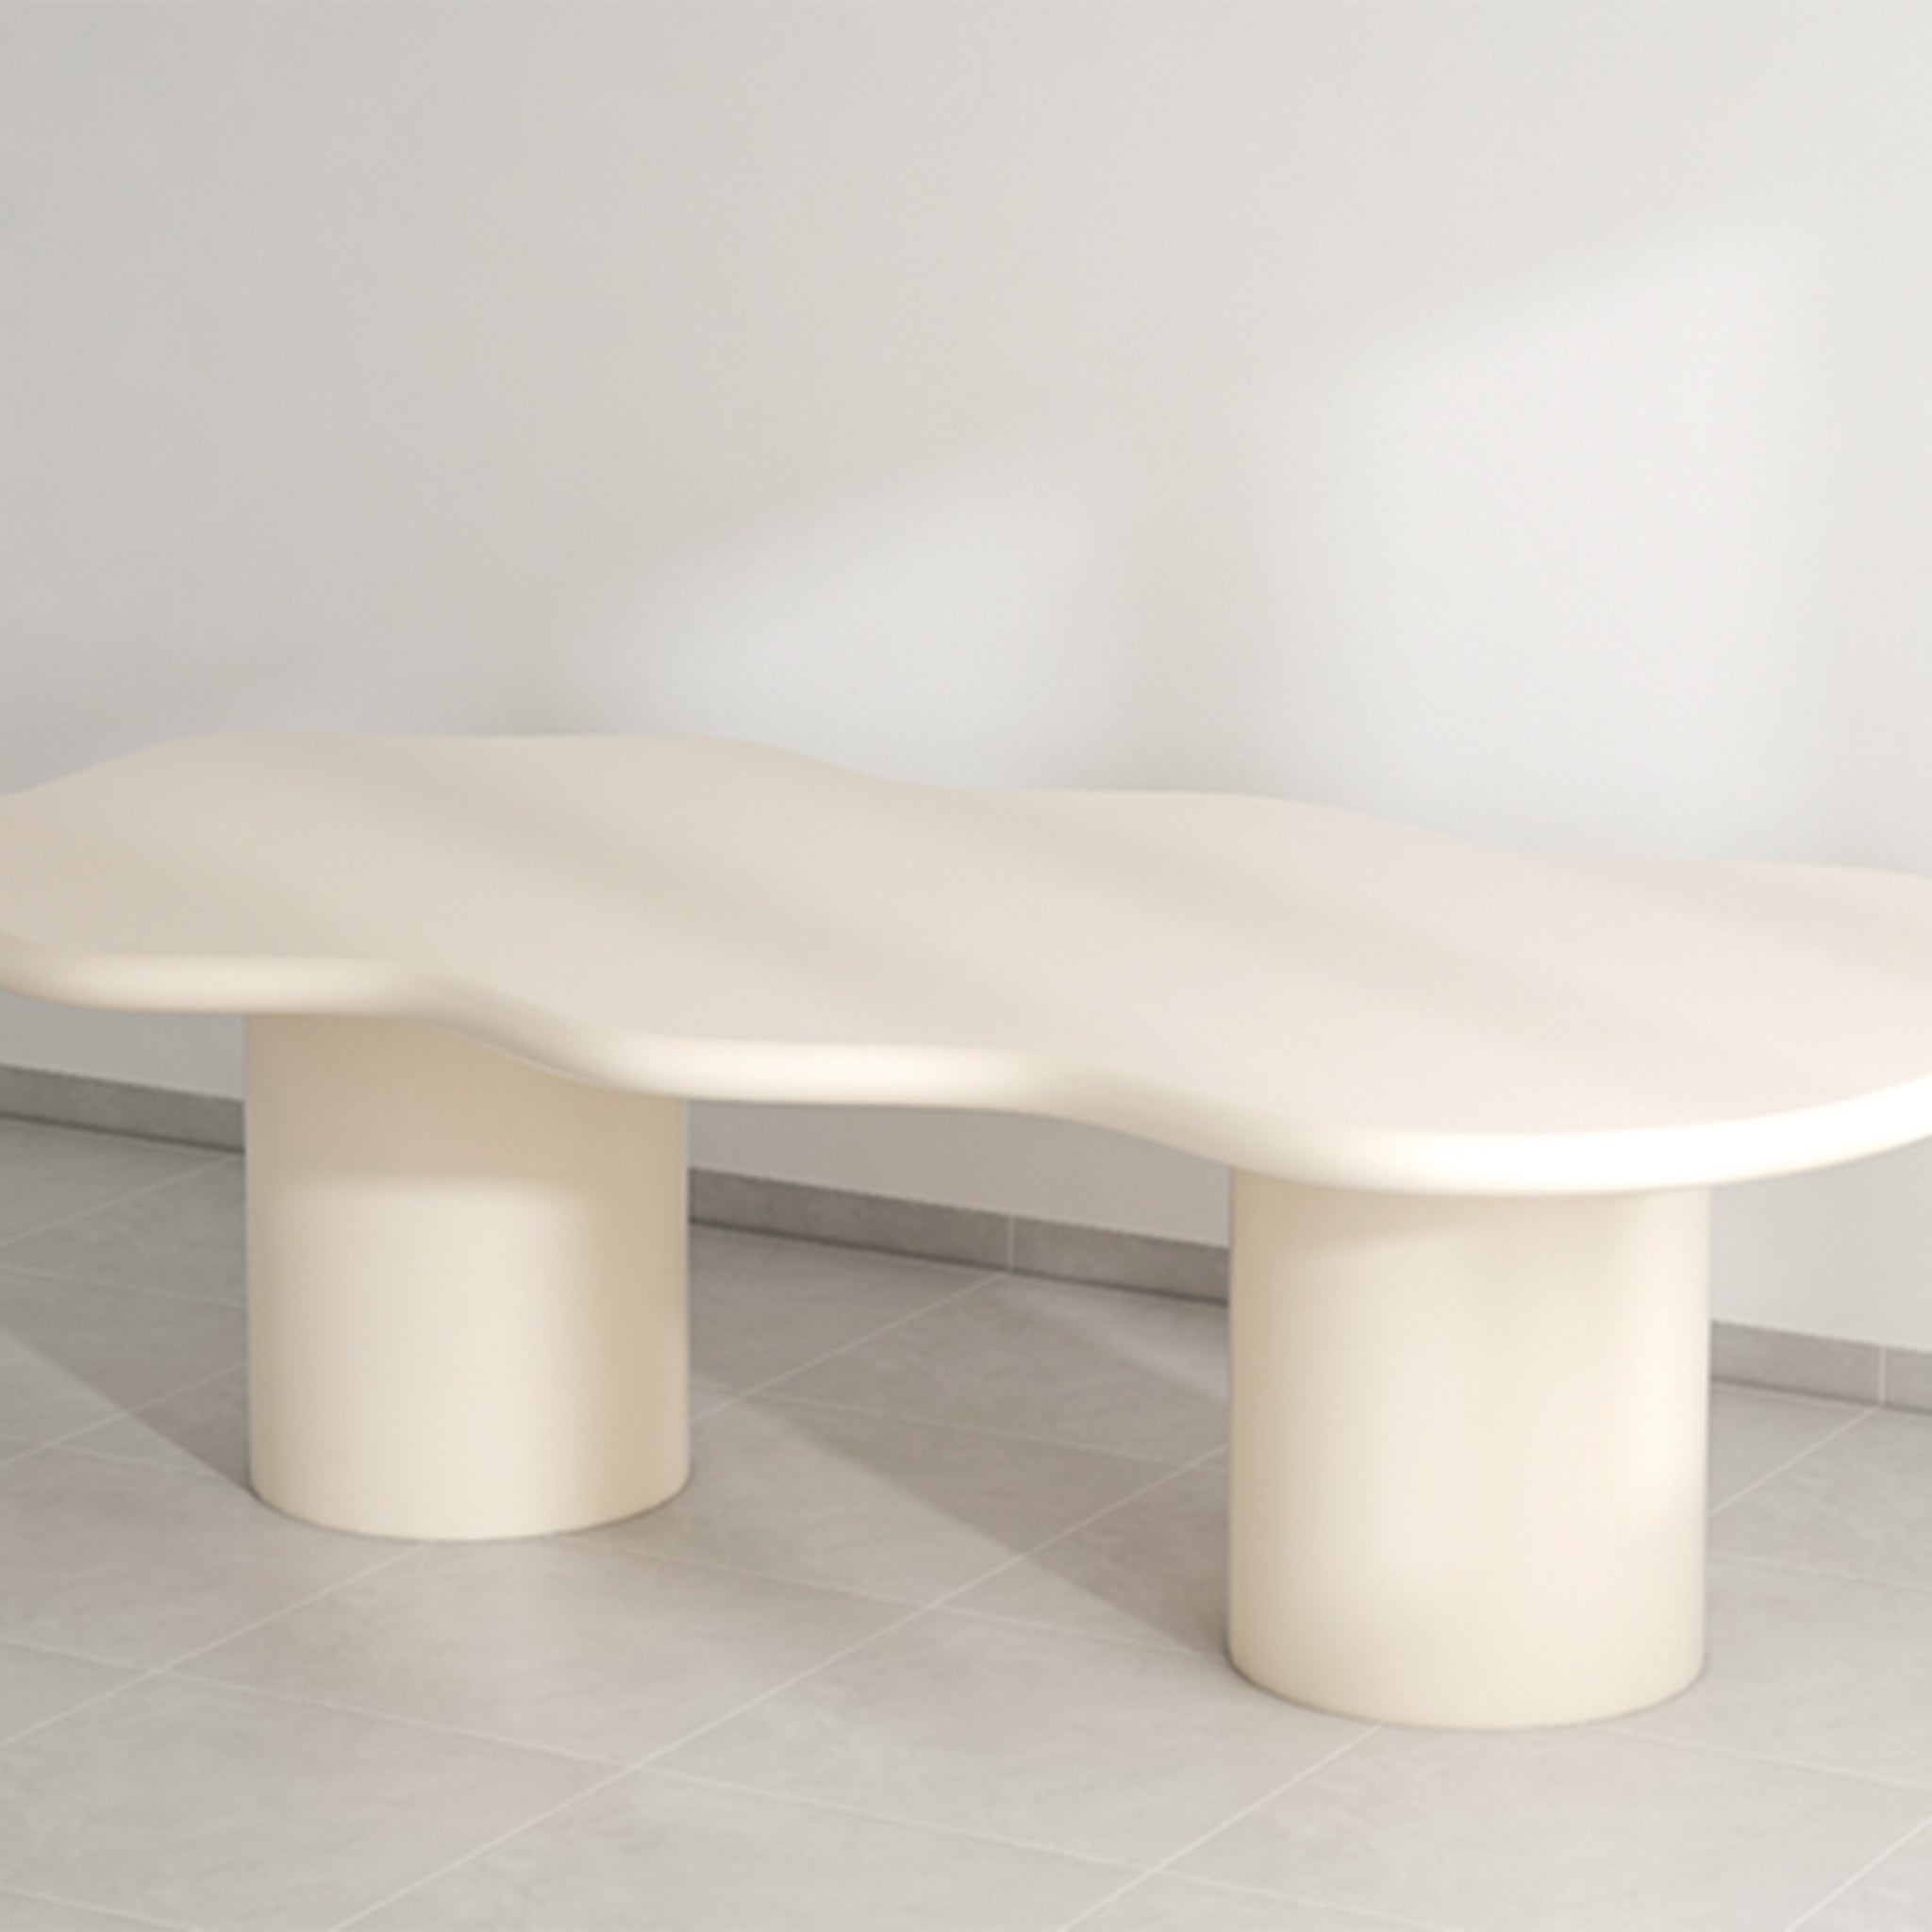 Contemporary dining table featuring a smooth, beige microplaster finish